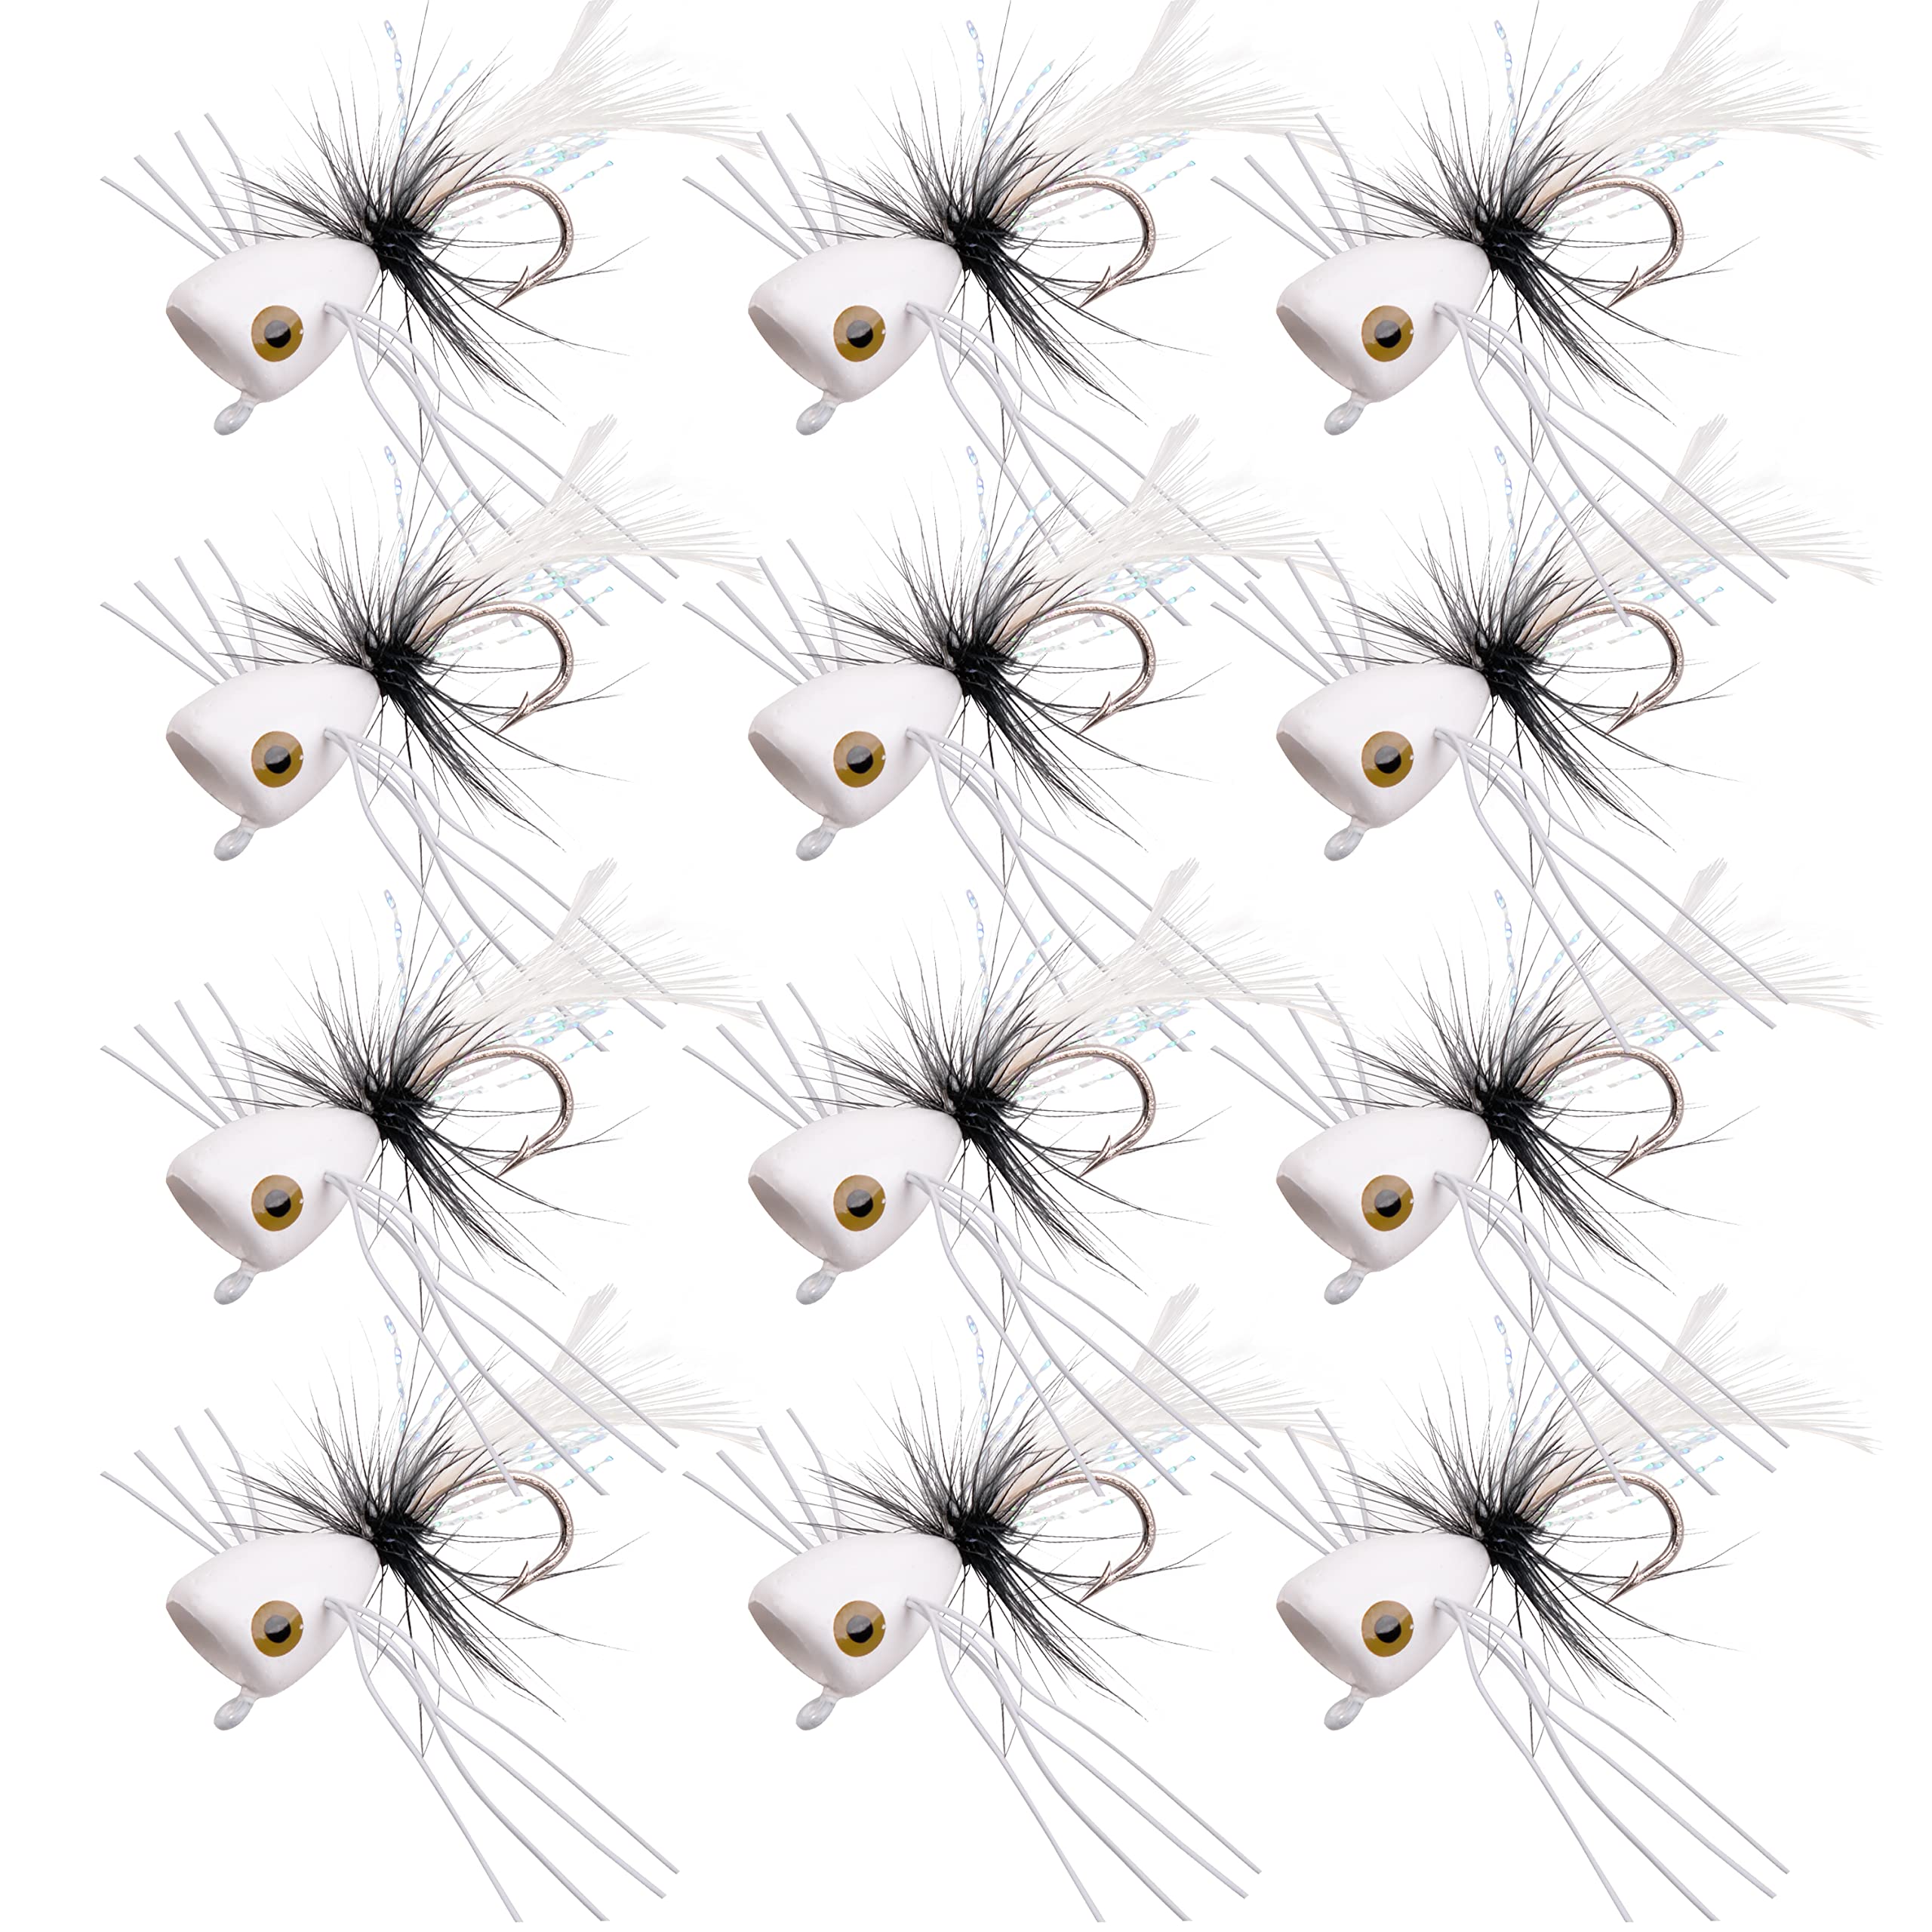 Fly Fishing Poppers, 12pcs Popper Flies for Fly Fishing Topwater Bass  Panfish Trout Salmon Bluegill Poppers